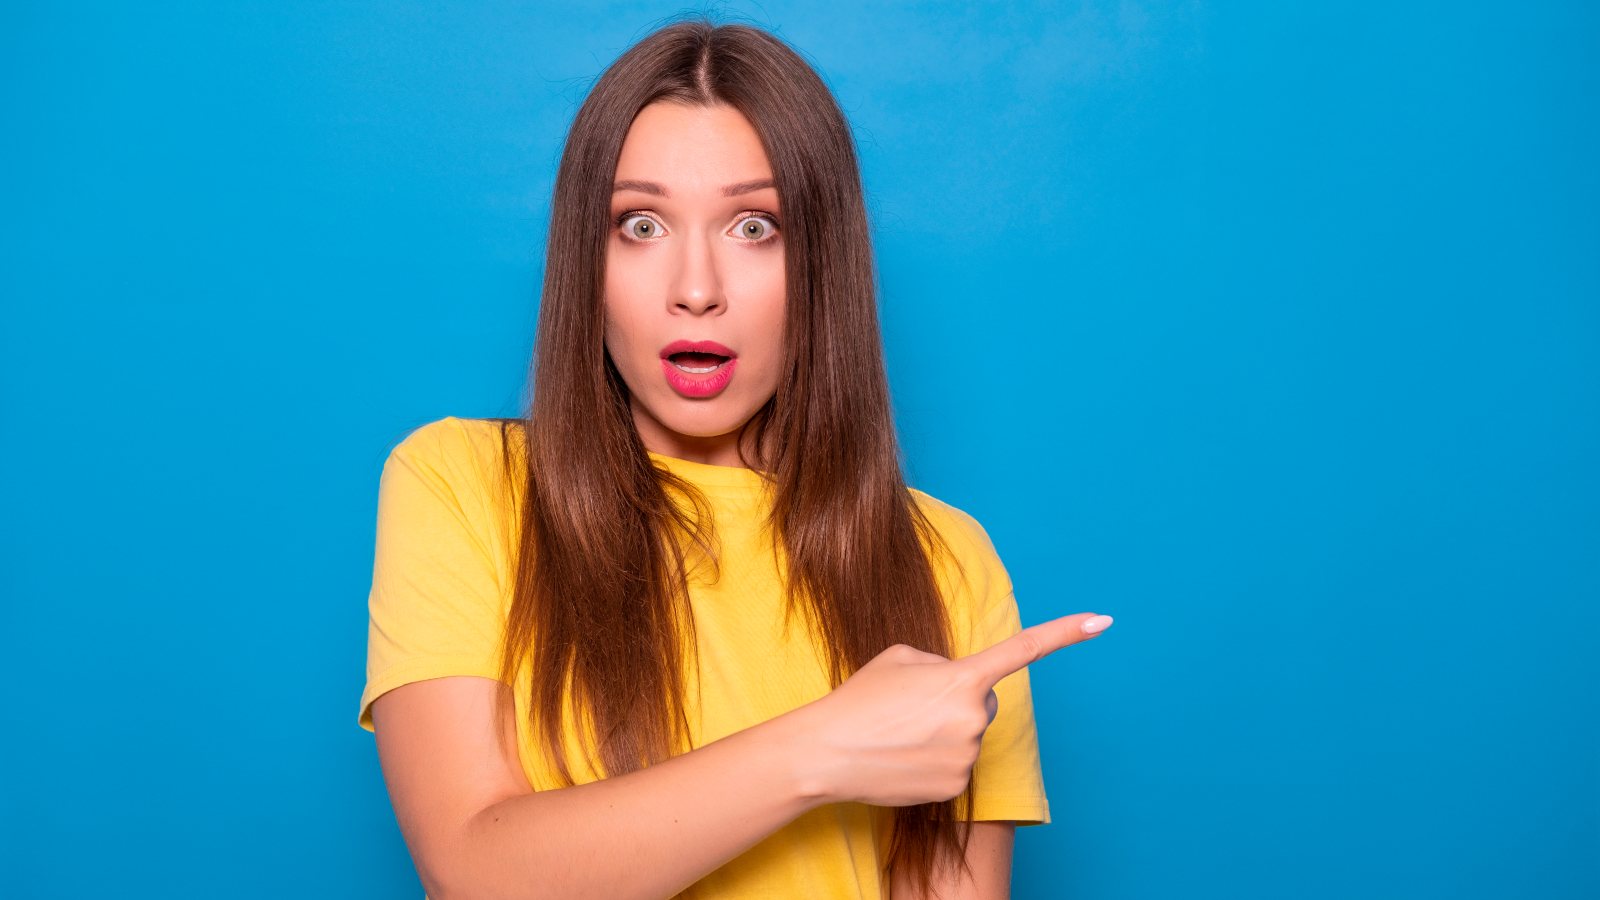 Cute brunette woman with long hair posing in yellow t-shirt on a blue background. Emotional portrait. She smiles happily with flawless white teeth and points finger on something